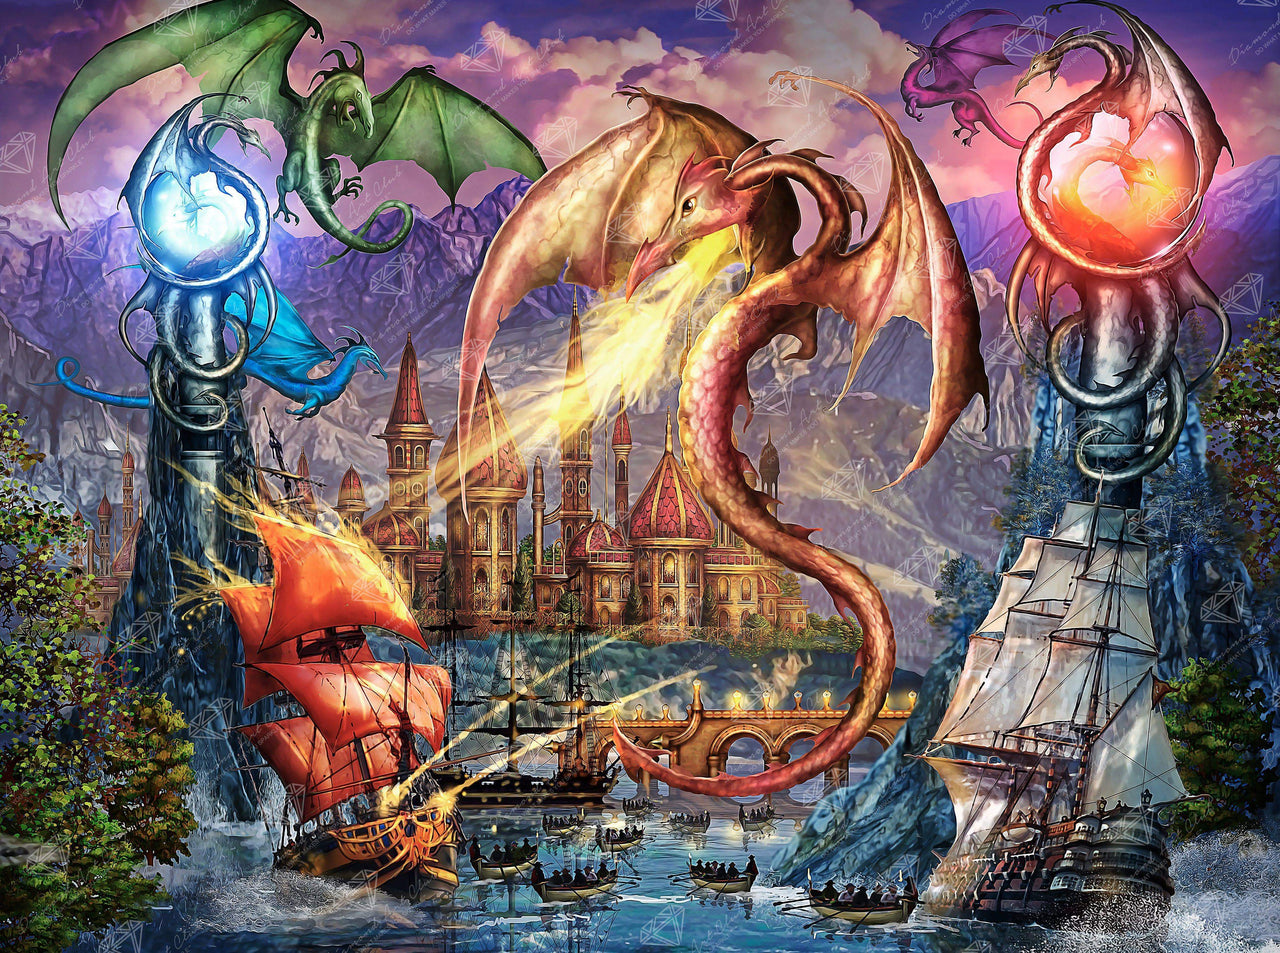 Diamond Painting Dragon Attack 35.8" x 27.6″ (91cm x 70cm) / Square with 67 Colors including 3 ABs / 99,996